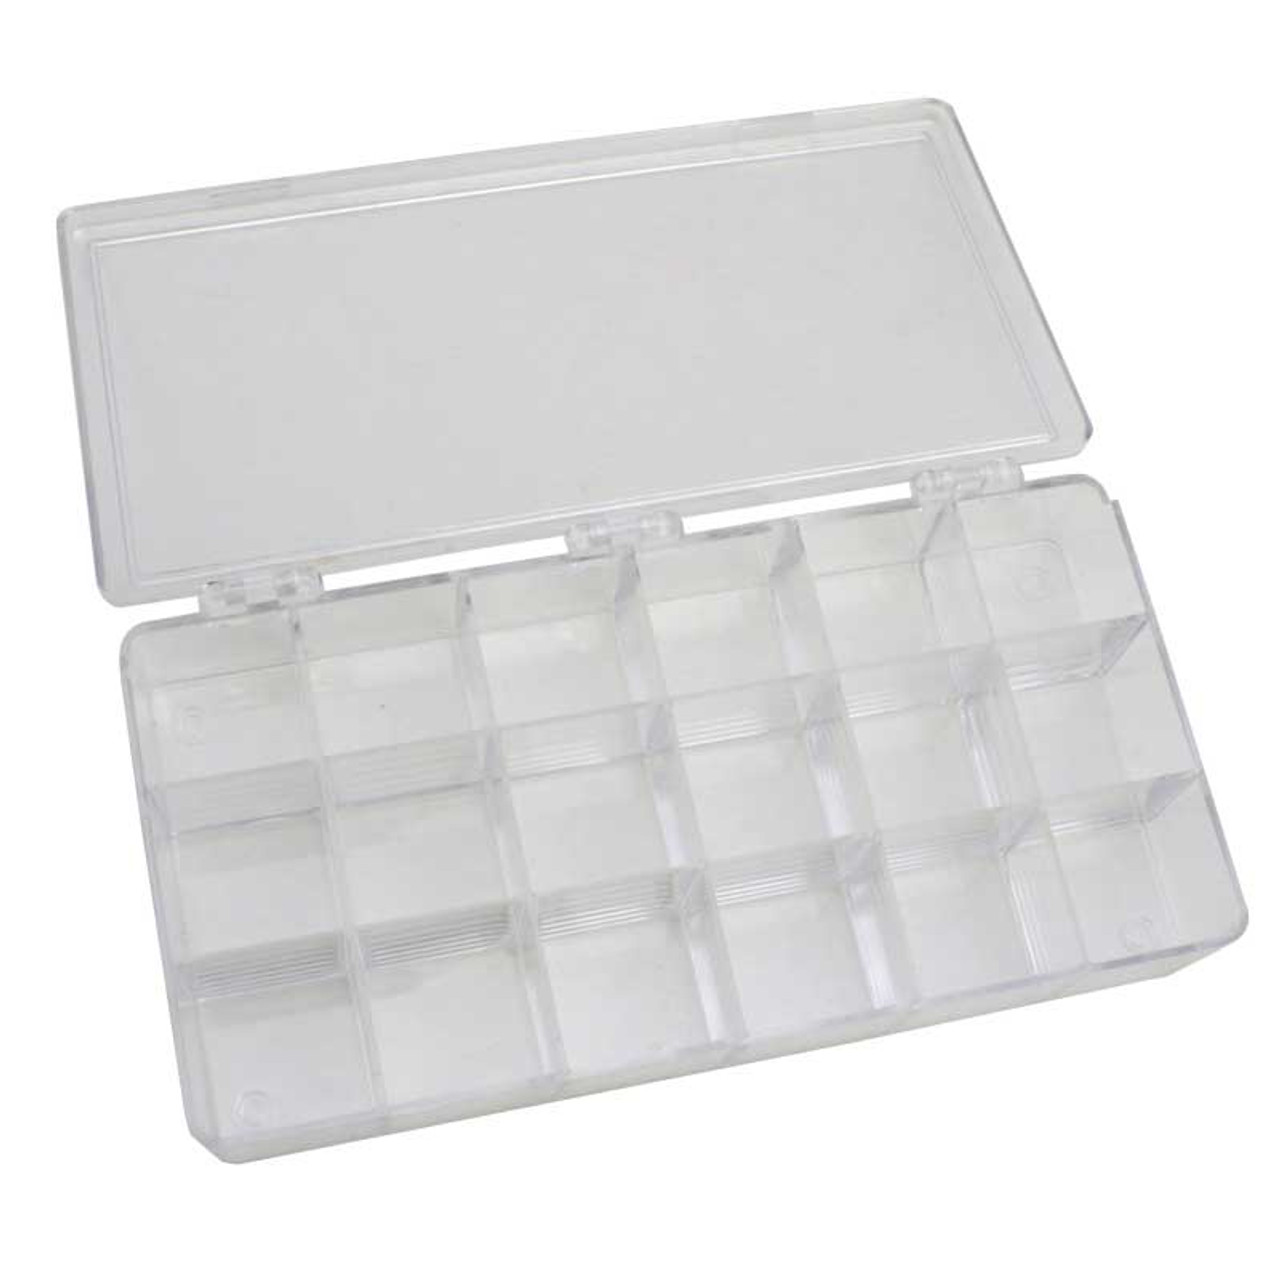 18 Compartment Jewelry and Watch Part Storage Box